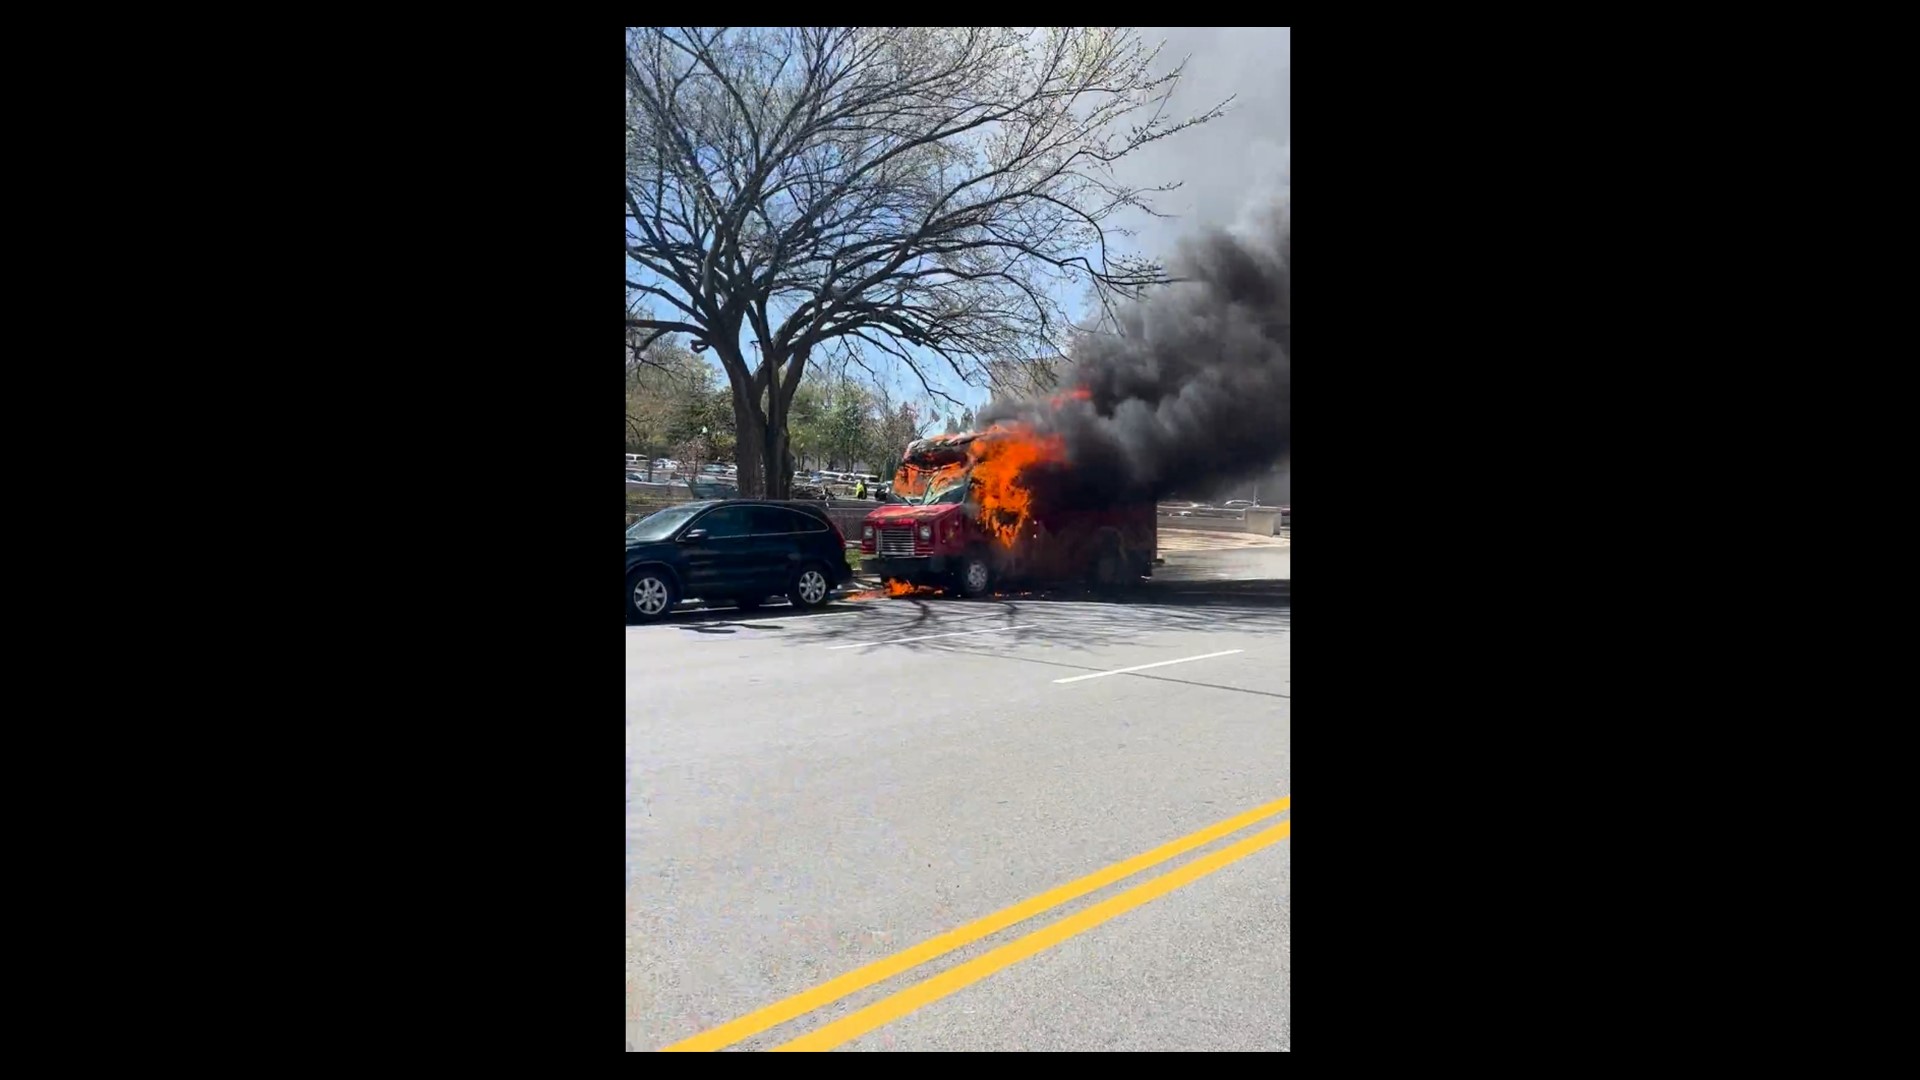 DC Fire/EMS was dispatched at 1:06pm for a reported food truck on fire near the intersection of 10th Street & Constitution Avenue NW.